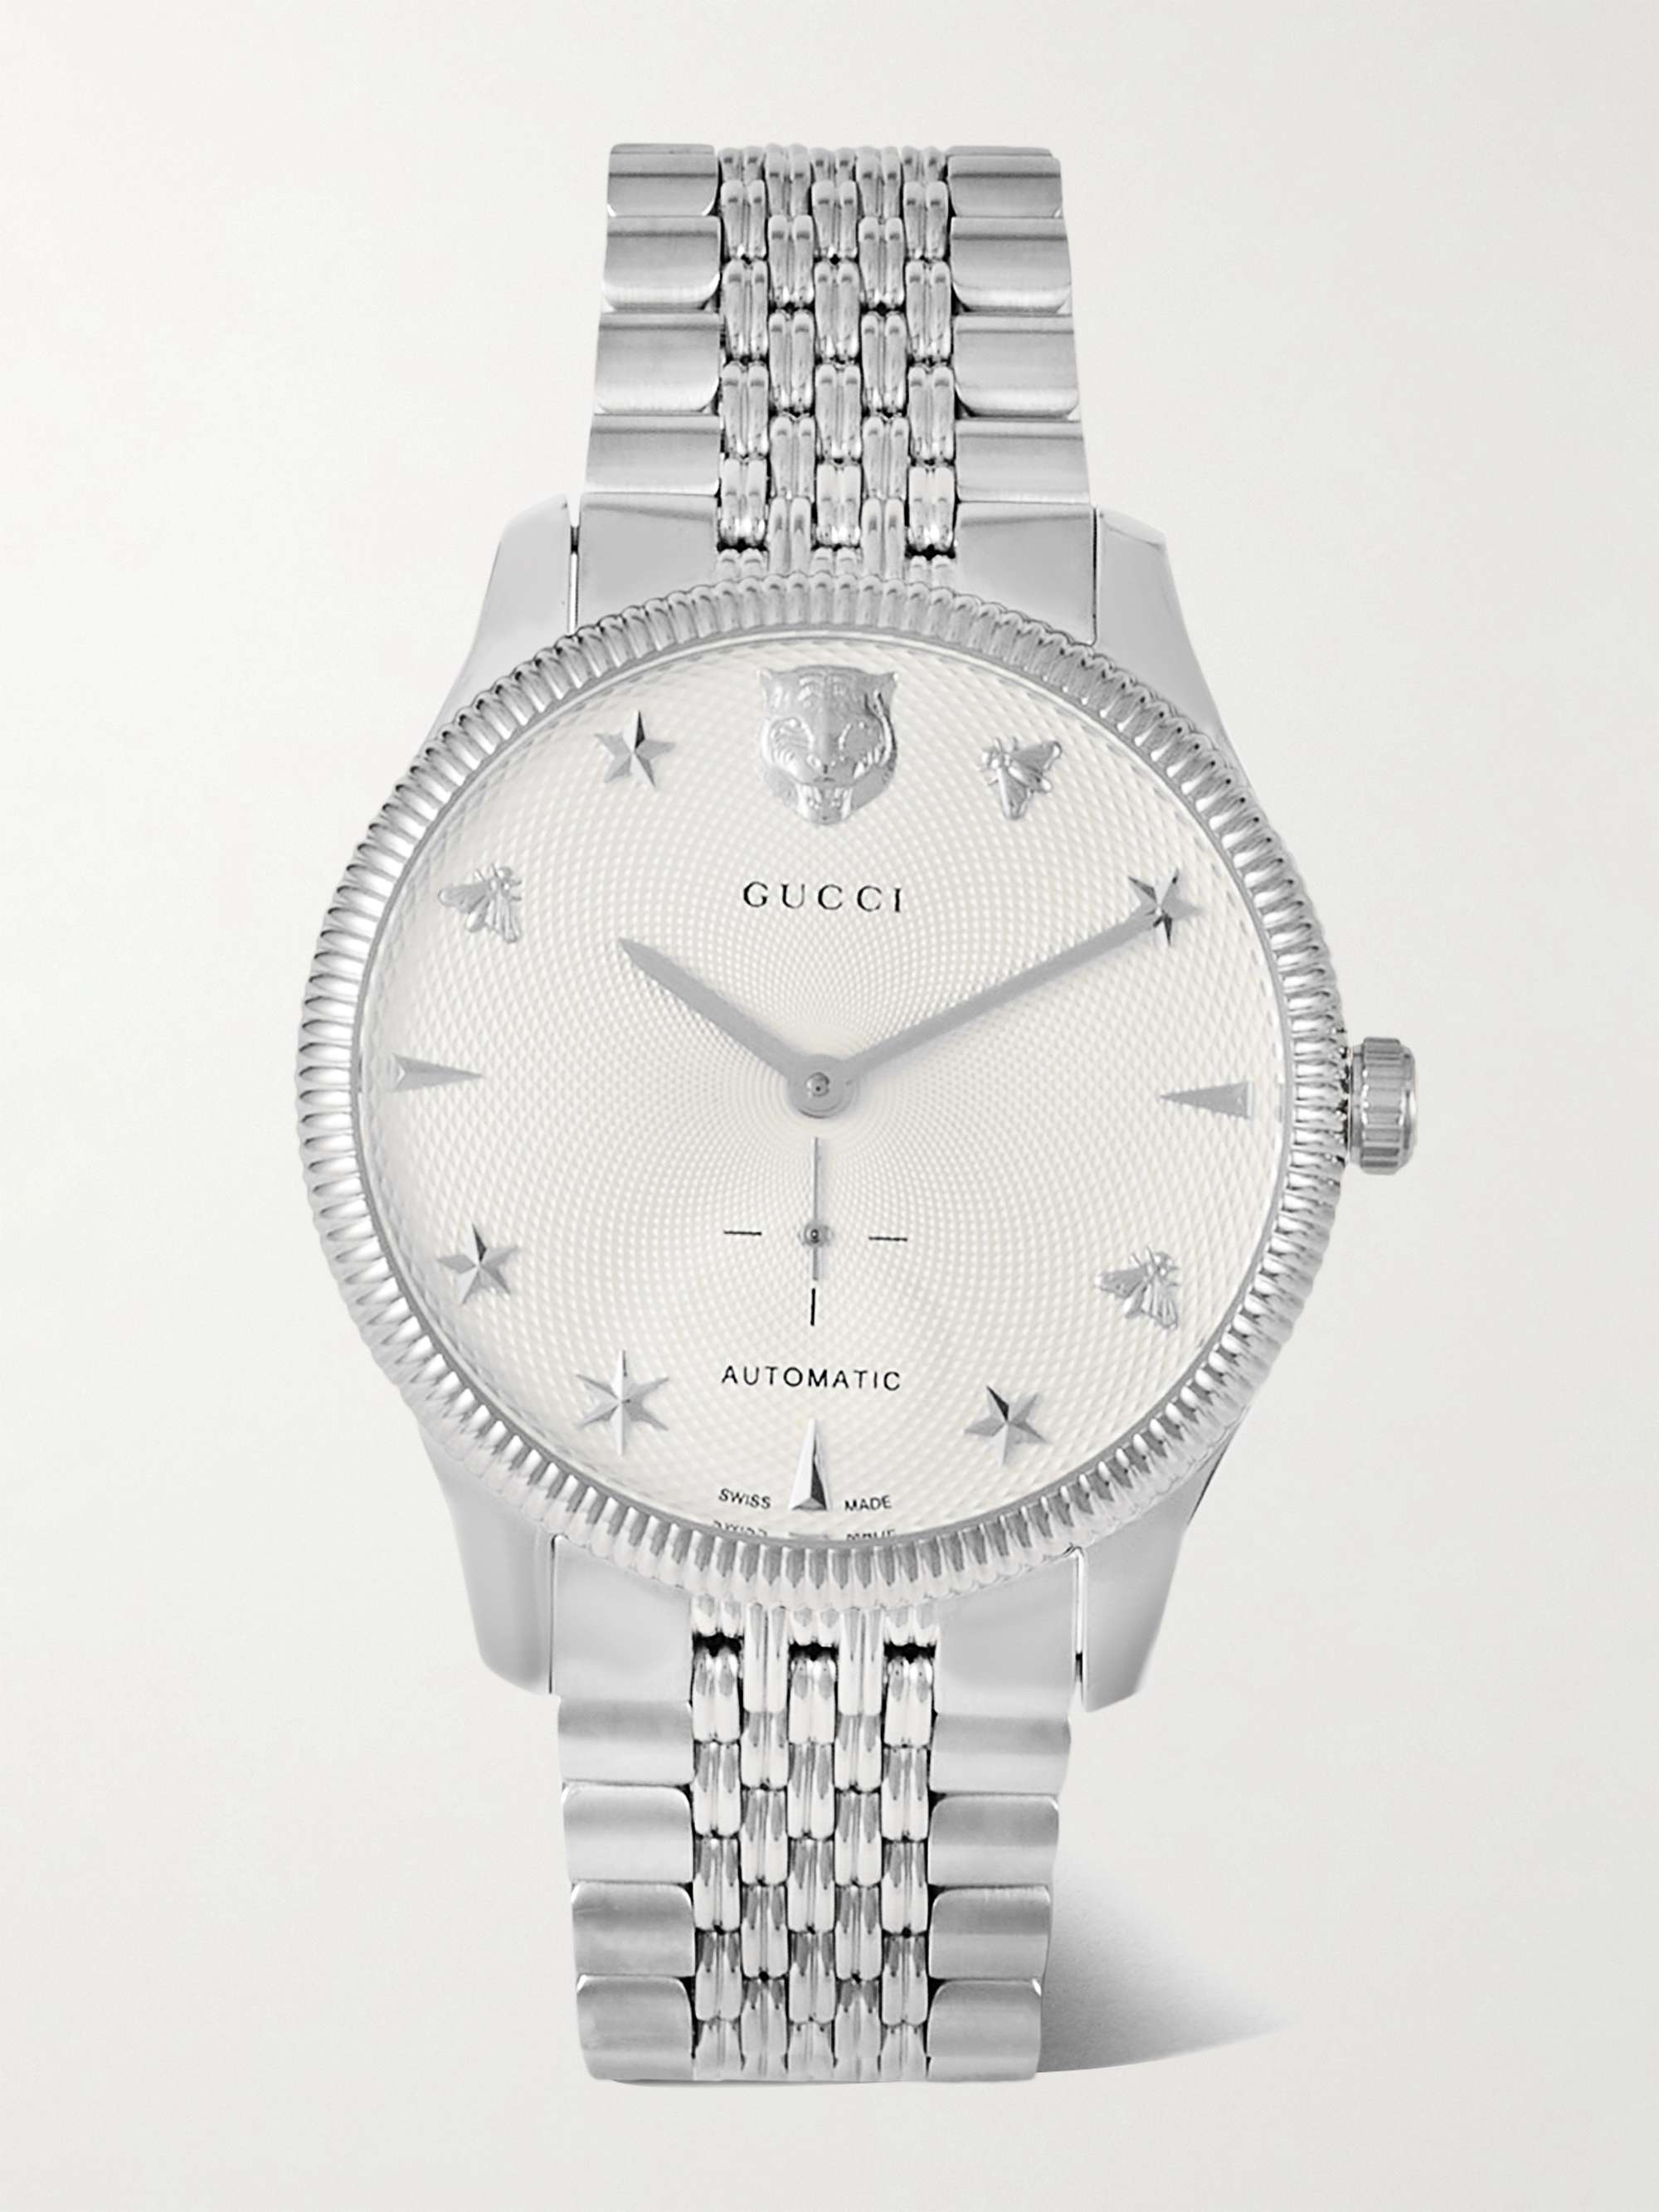 GUCCI G-Timeless Automatic 40mm Stainless Steel Watch | MR PORTER